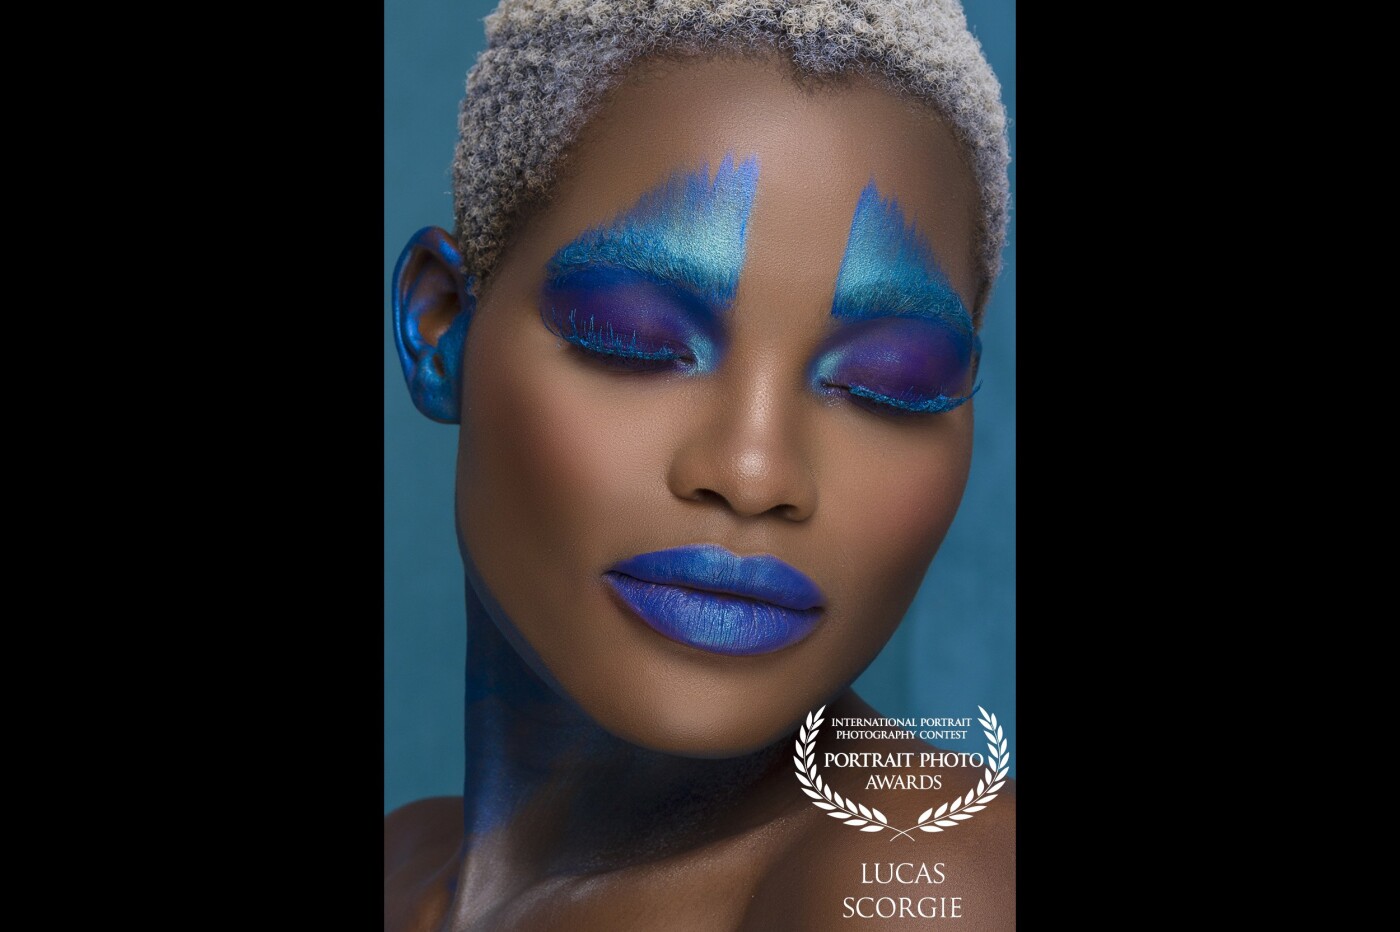 Once I saw this model face and the funky hair colour I just knew I have to do some beautiful work with her. I just love how you can play with color on dark skin. 